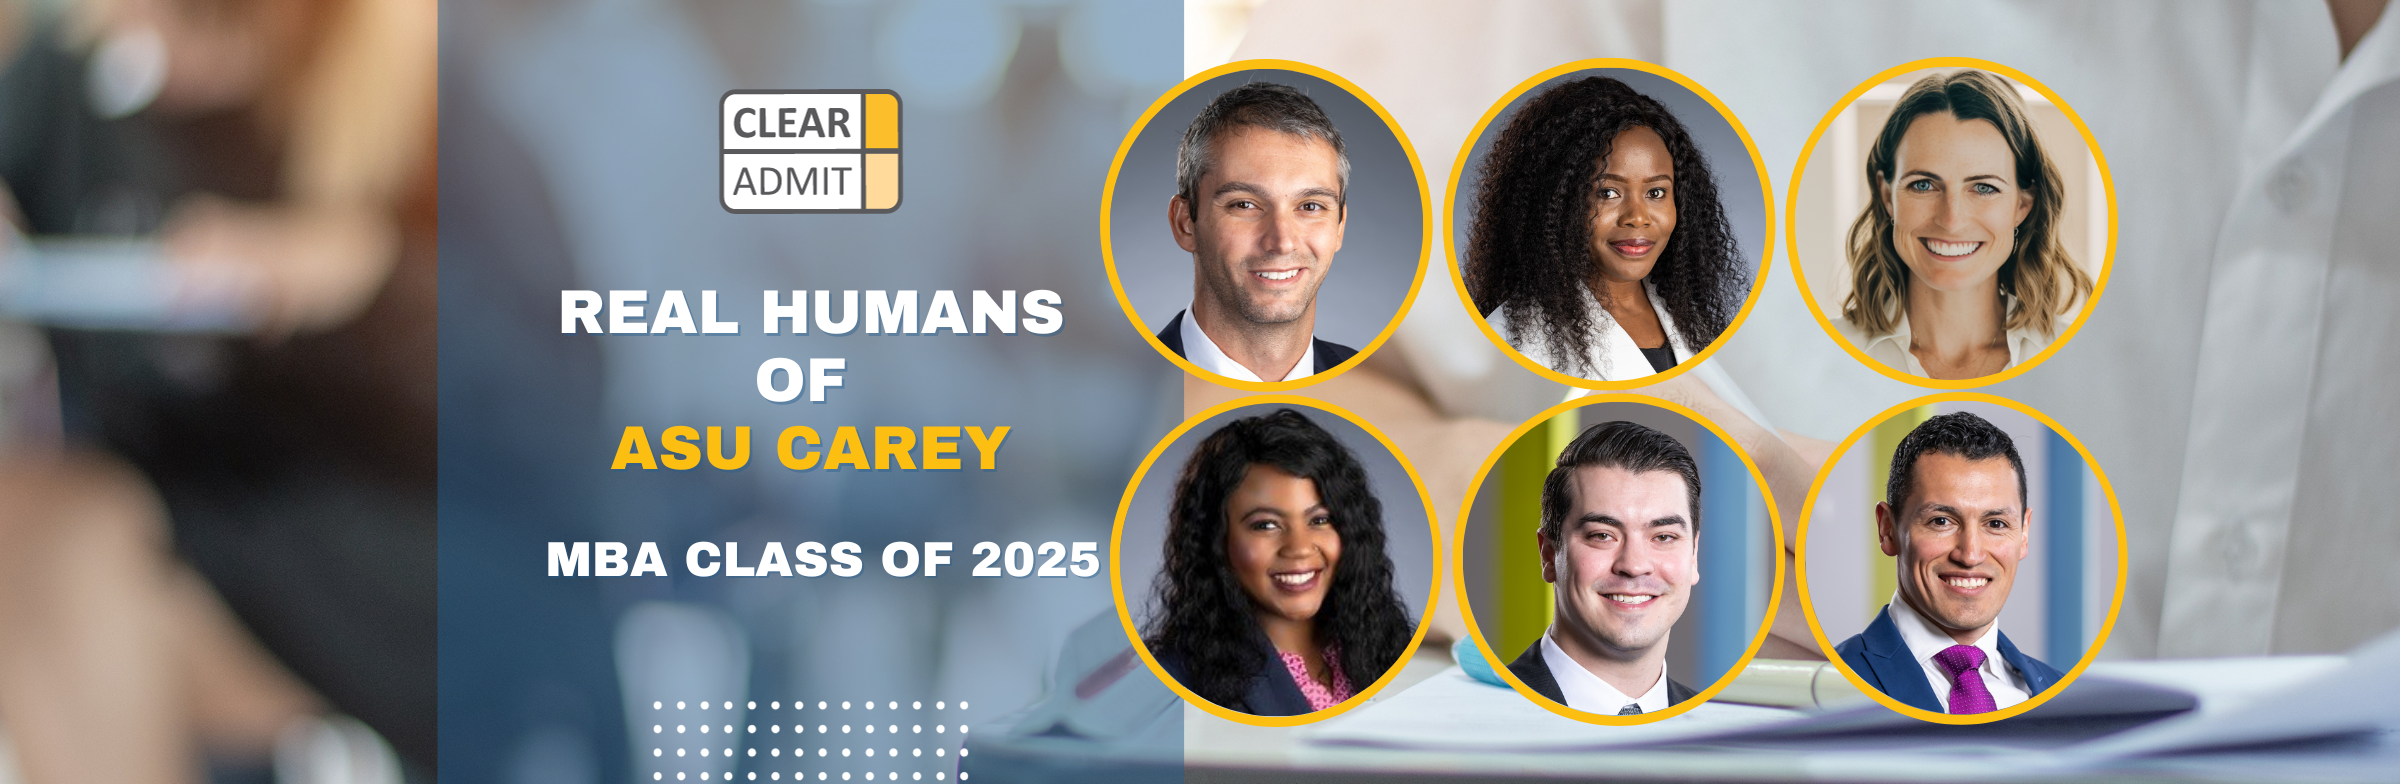 Image for Real Humans of ASU Carey’s MBA Class of 2025